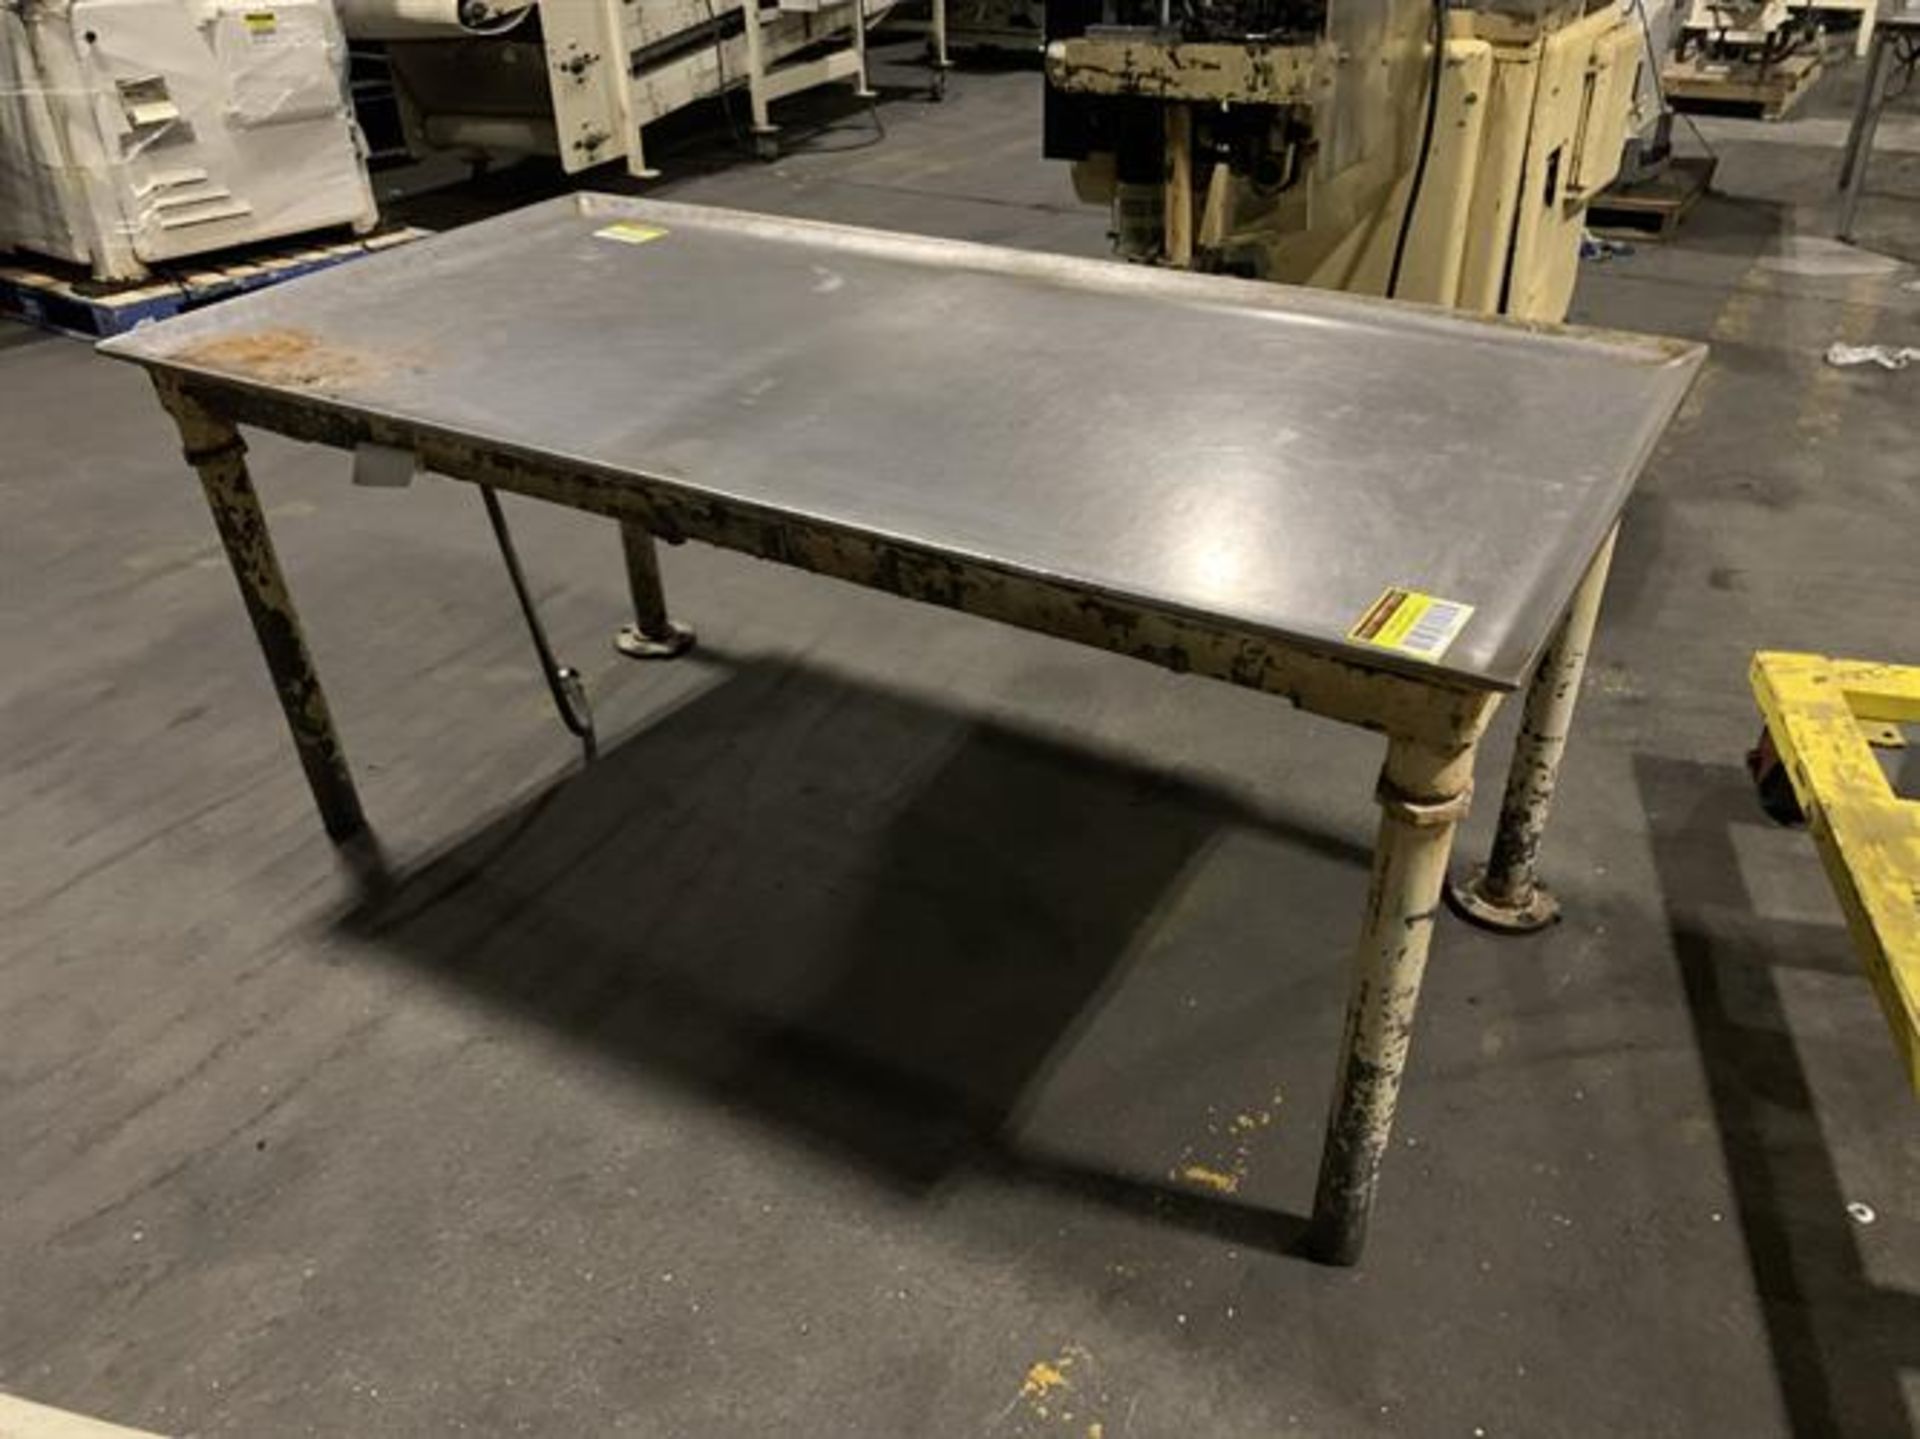 Carbon Steel 3 x 6 ft Water Cooled Table - Image 2 of 3